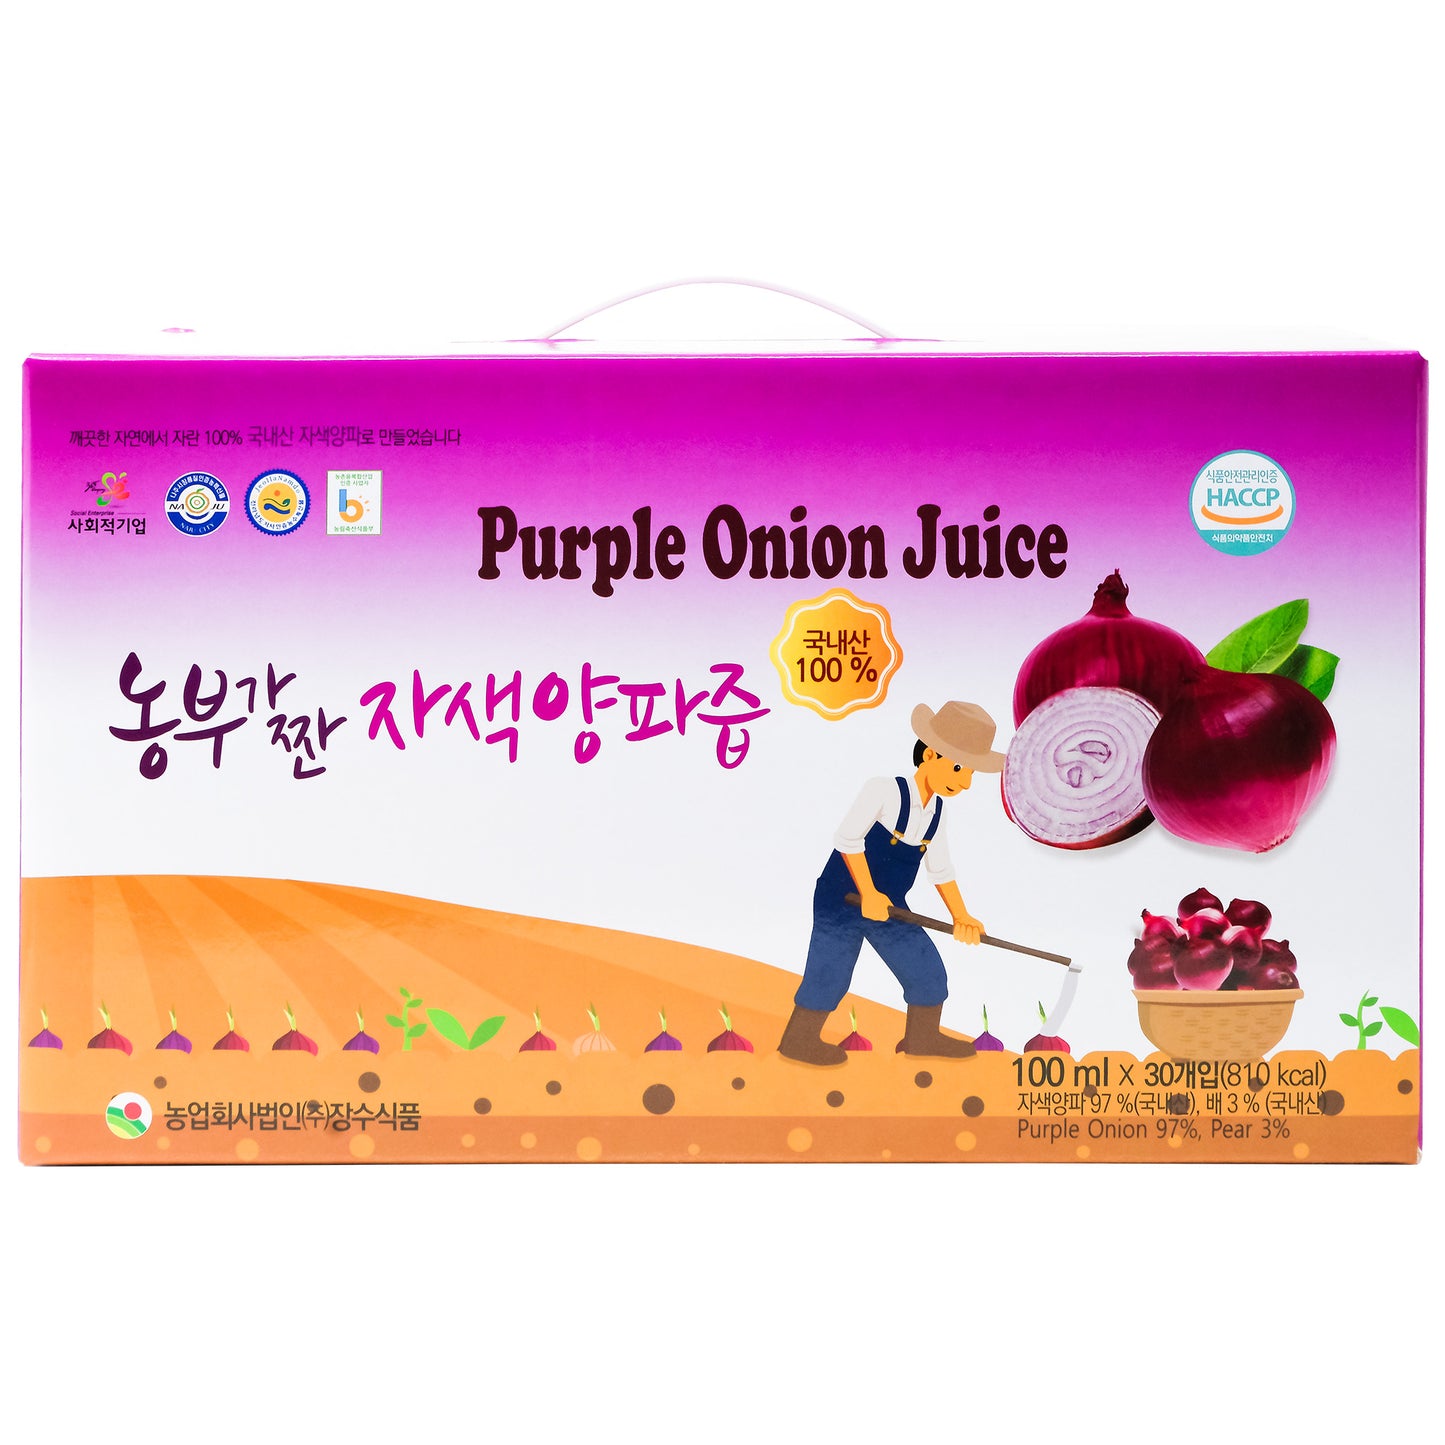 Purple Onion Juice Squeezed by Farmer, 3.4oz per Pack, 30 Packs 자색양파즙